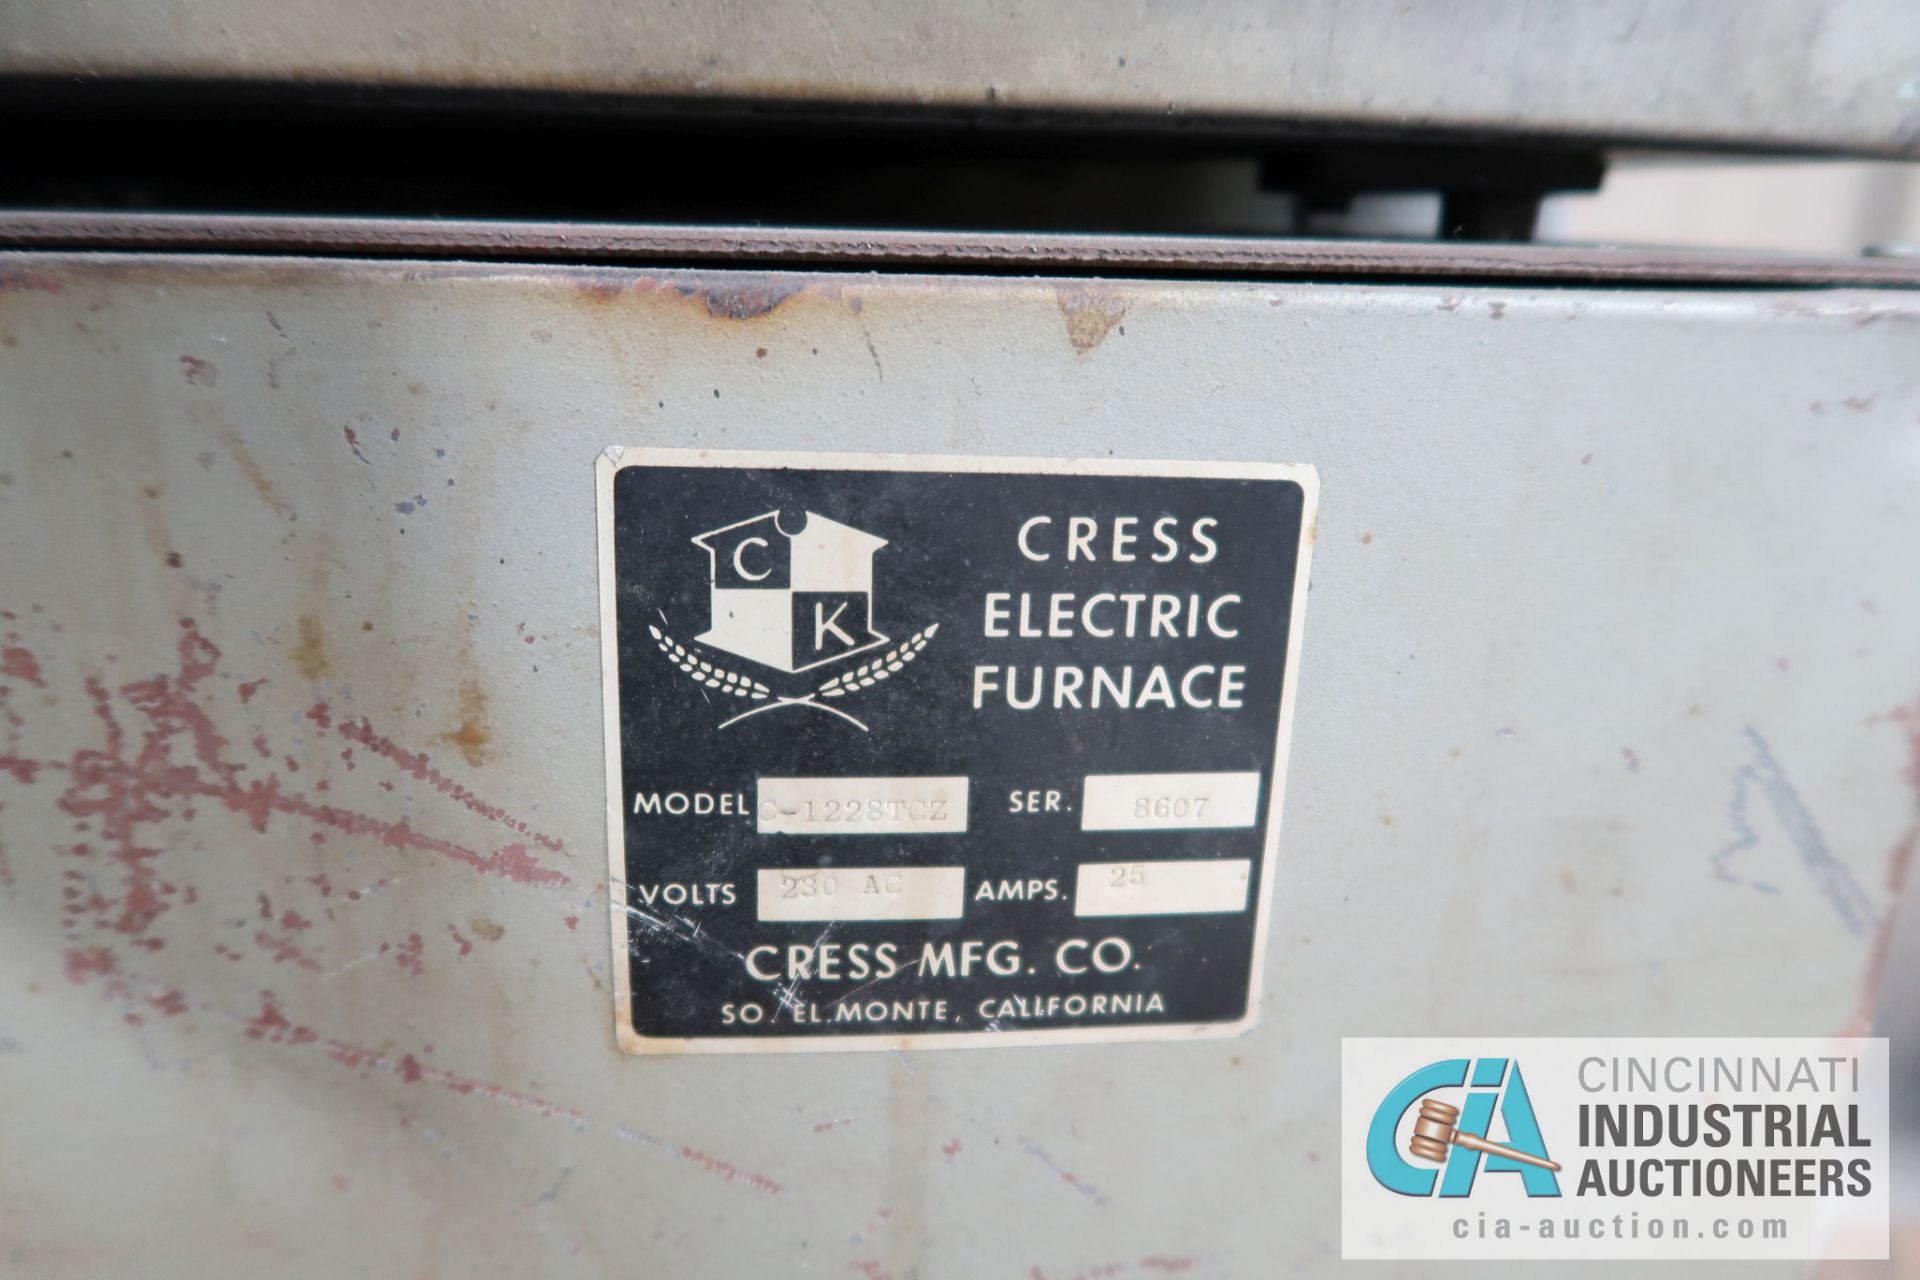 CRESS MODEL C-1228TC2 ELECTRIC FURNACE; S/N 8607, 230 VOLTS, 25 AMP, 3-PHASE **LOADING FEE DUE - Image 3 of 4